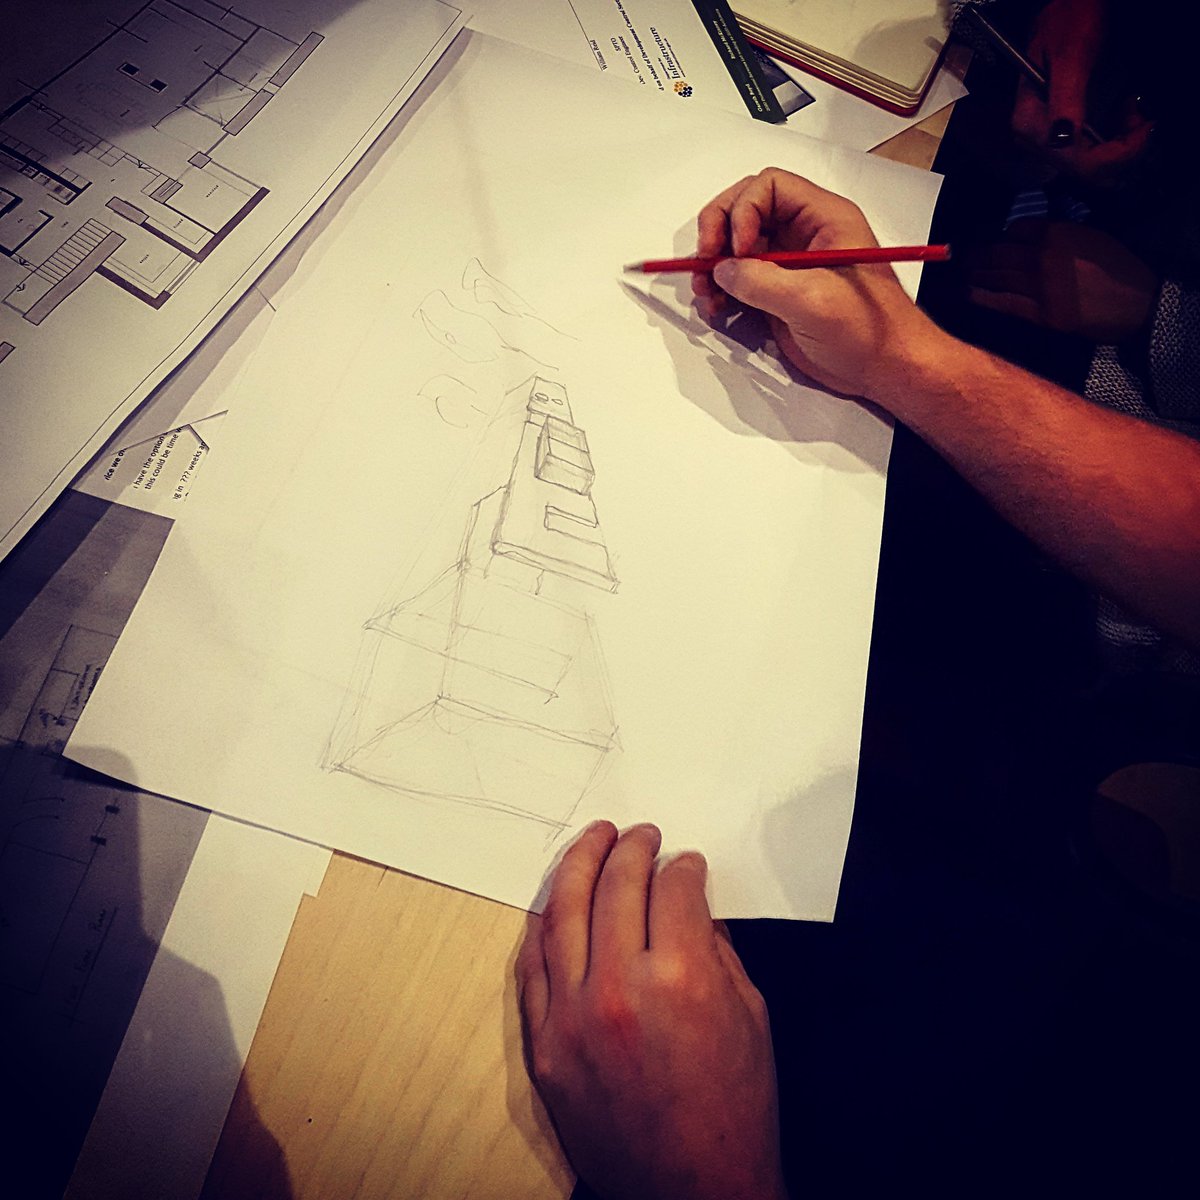 A snapshot of part of our design process...from hand sketches right through to virtual tour ☺ #architecturalsketches